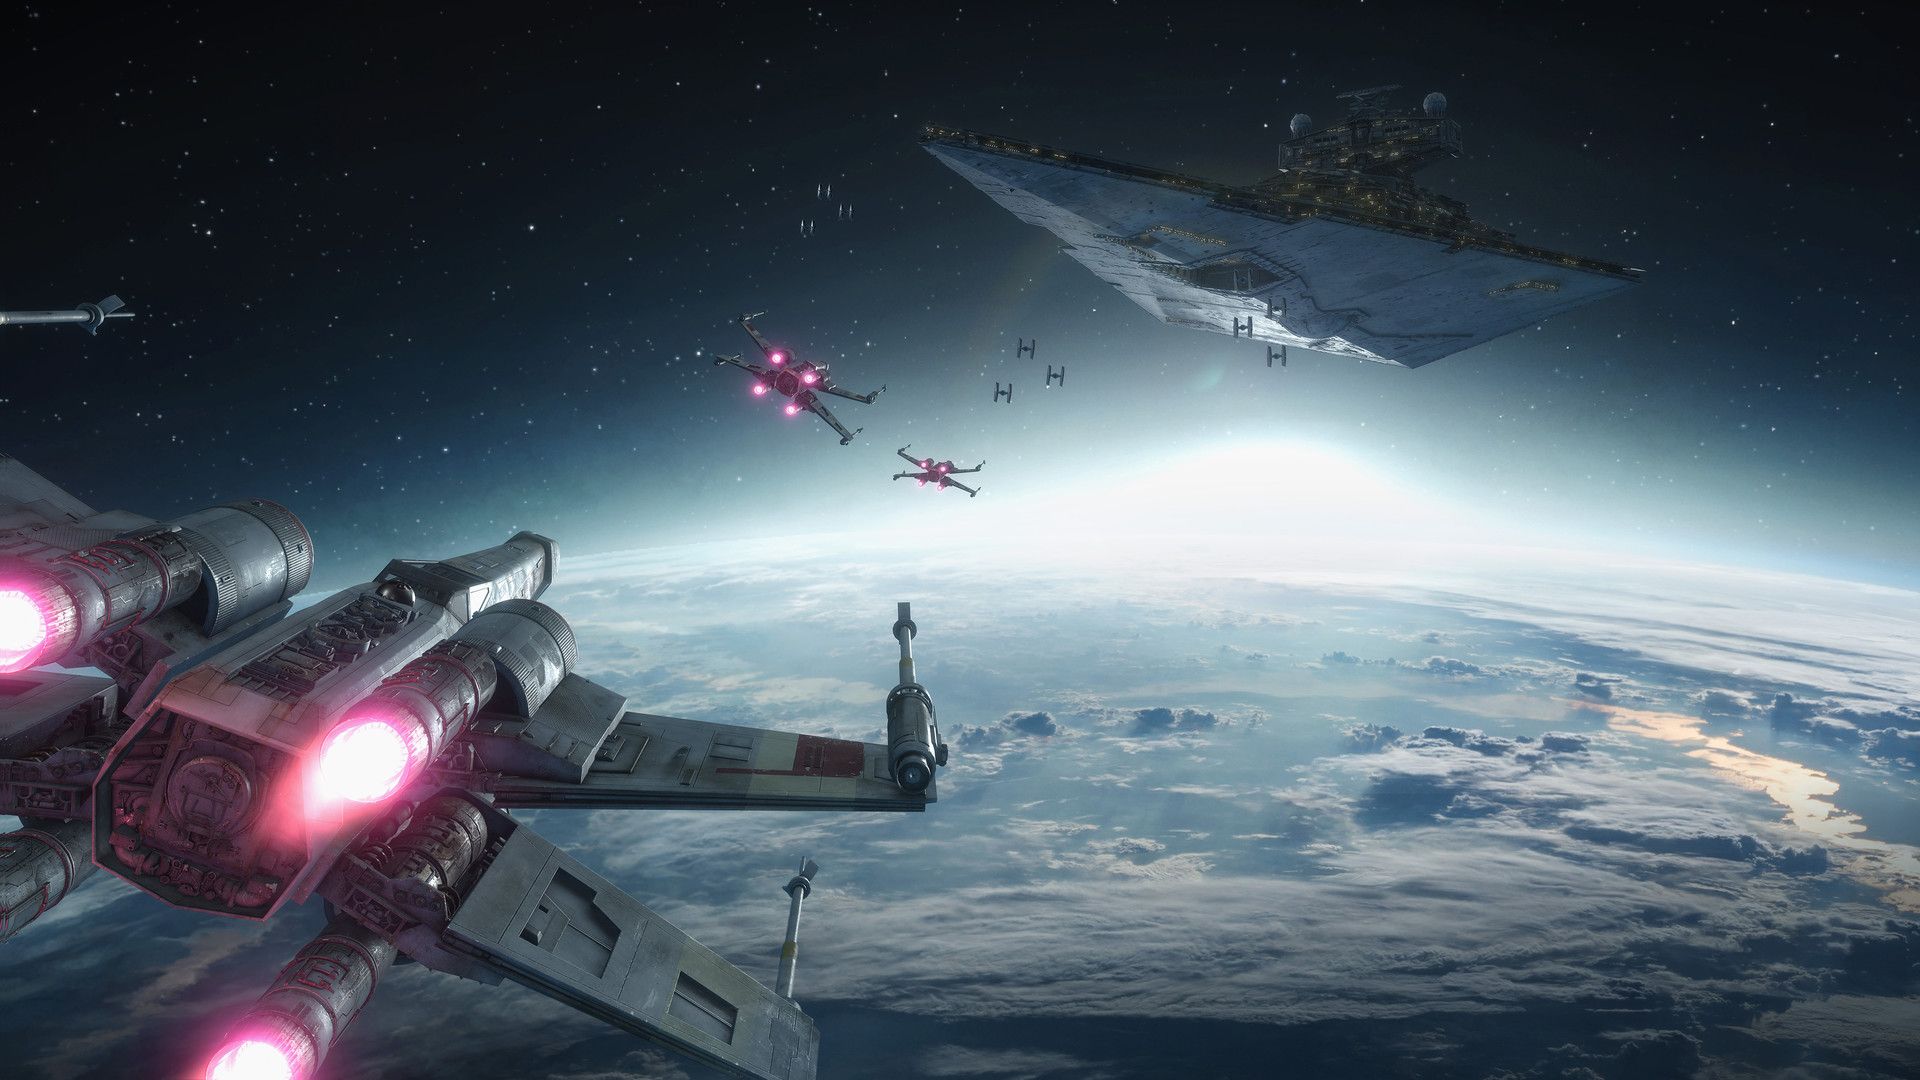 Squadrons Star Wars Wallpapers